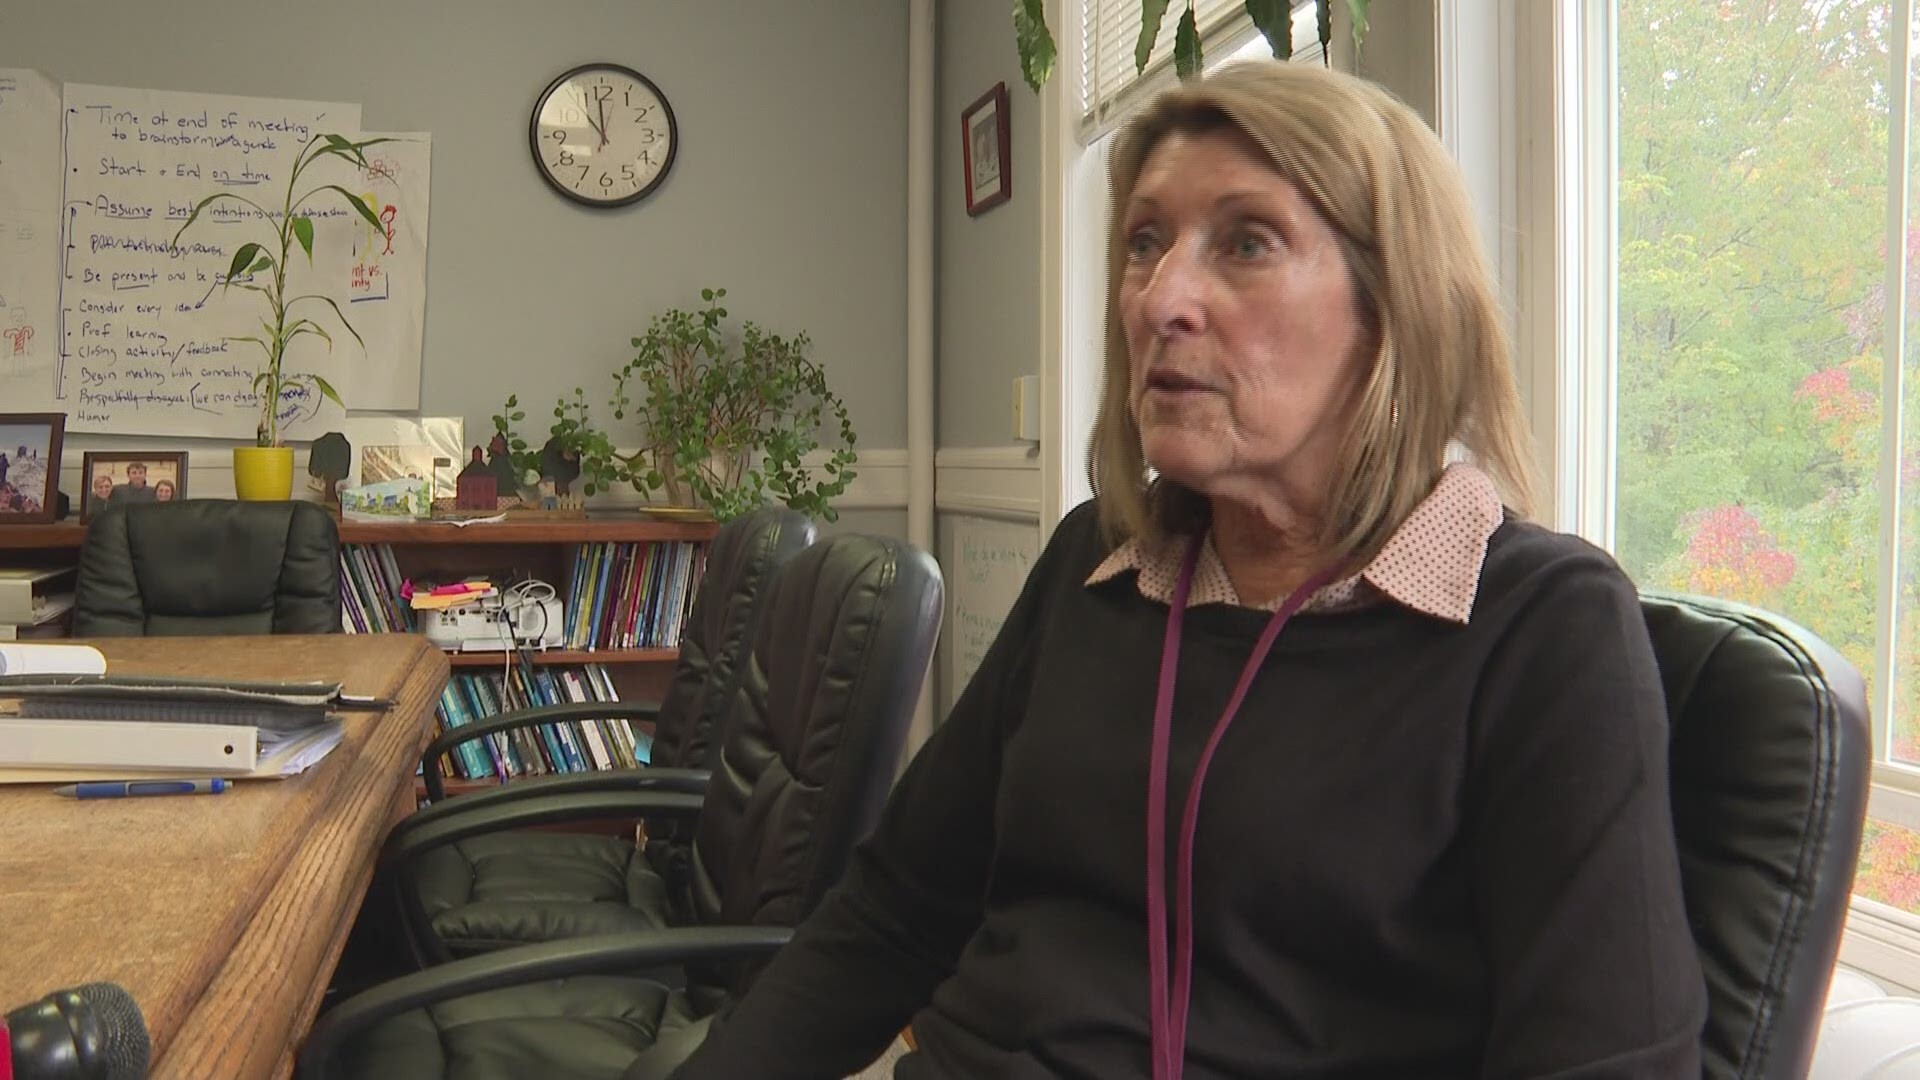 Cape Elizabeth Superintendent Donna Wolfrom says the way students reported sexual assault by leaving sticky notes in two school bathrooms caused confusion.